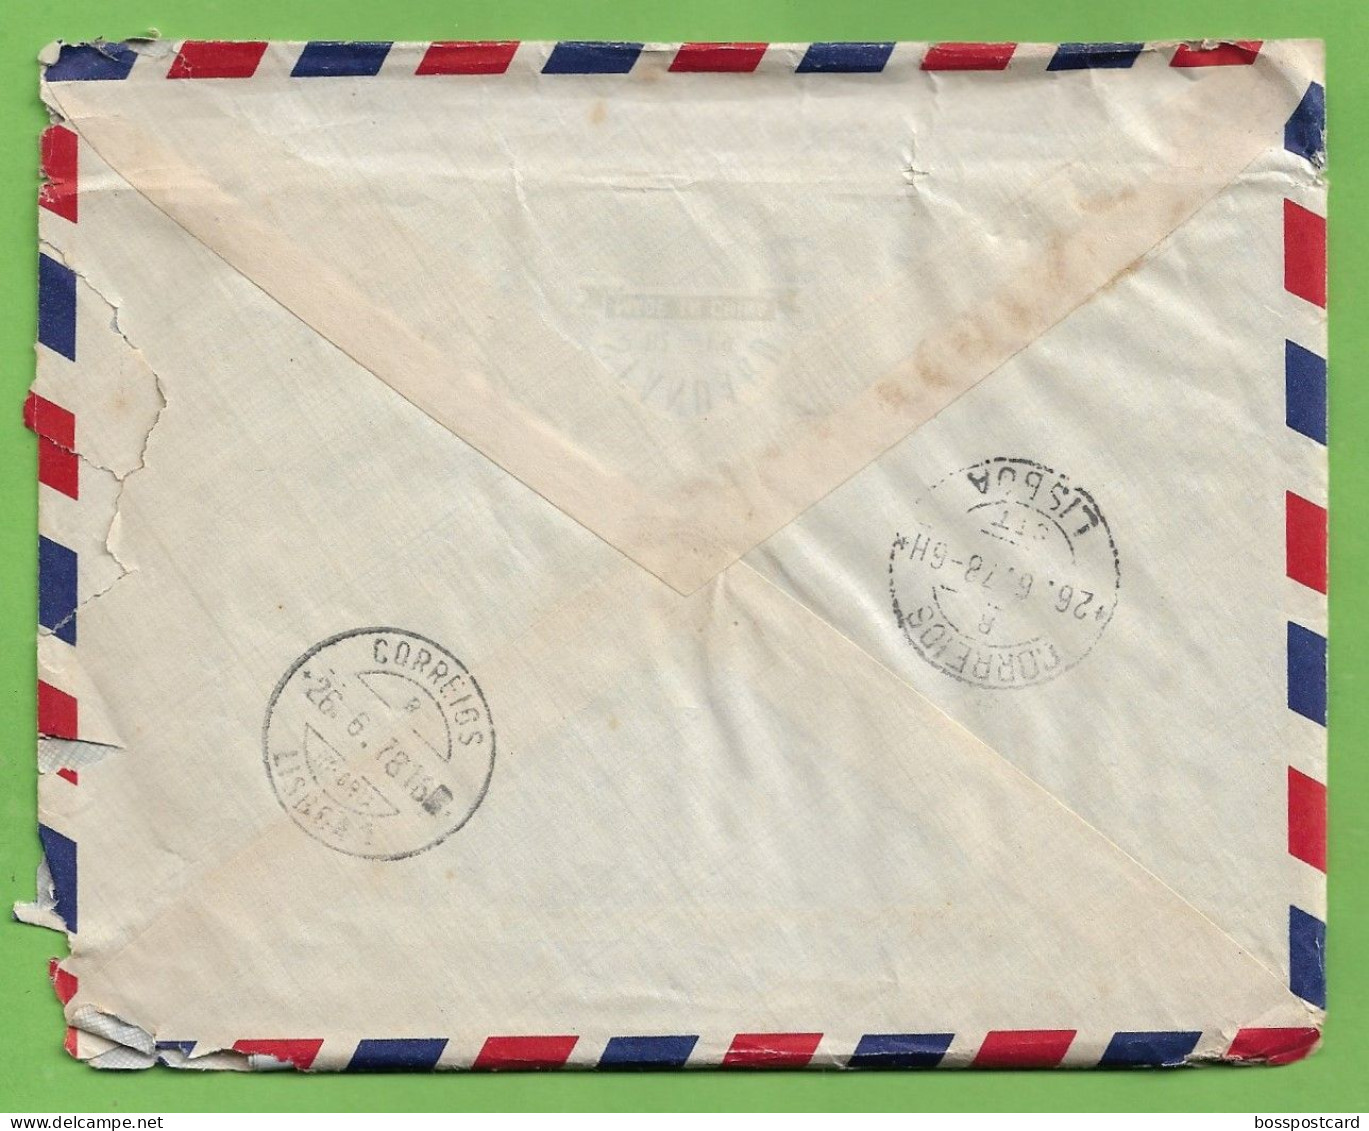 História Postal - Filatelia - Stamps - Timbres - Philately  - Carta - Cover - Letter - Macau - Macao - China - Portugal - Used Stamps